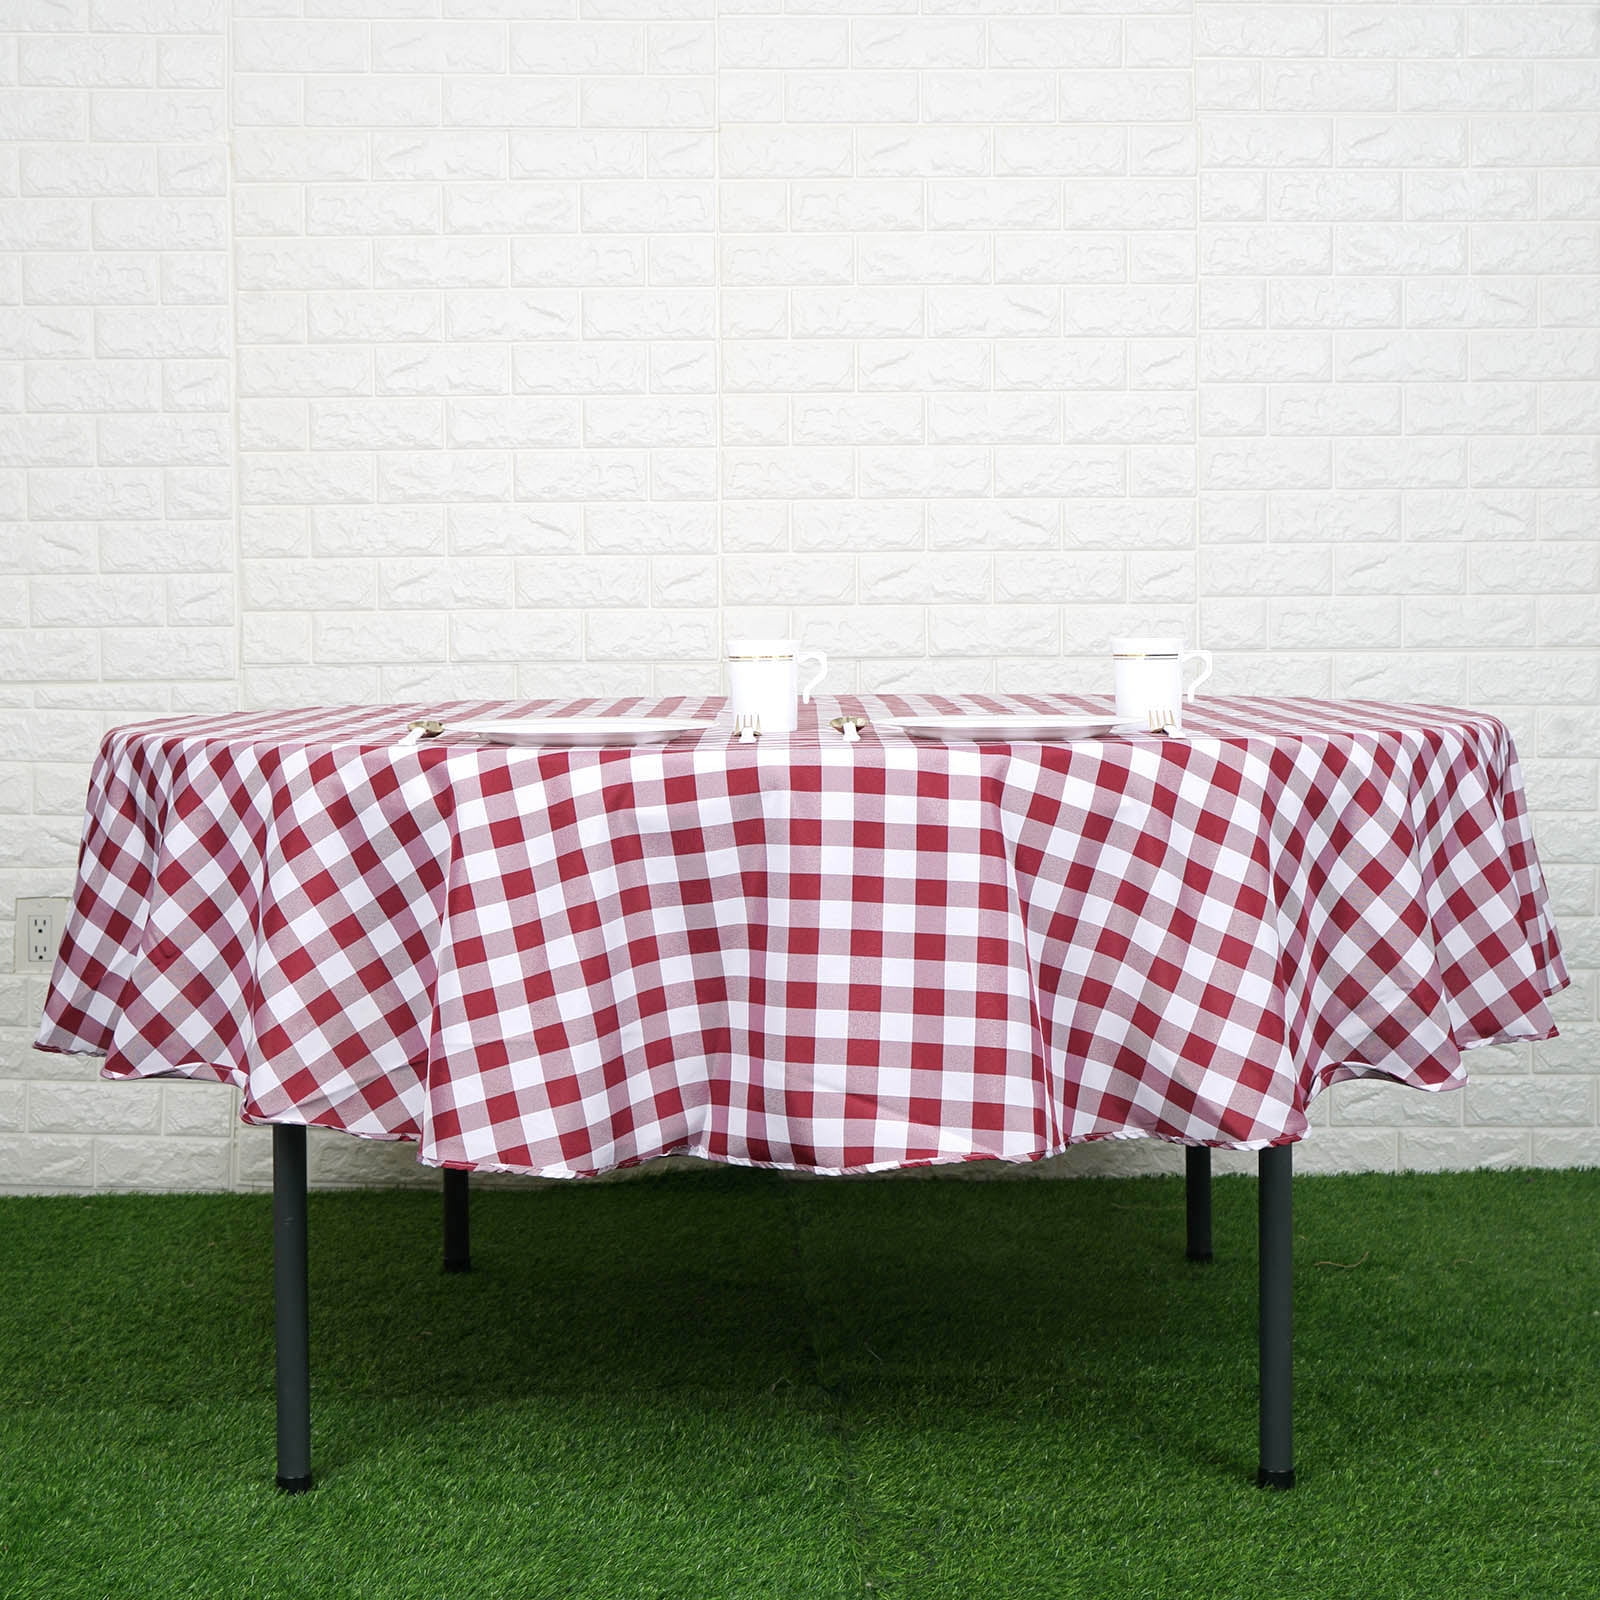 Gingham Plastic Temporary Disposable Check Table Cover Cloth Outdoor Picnic LE 